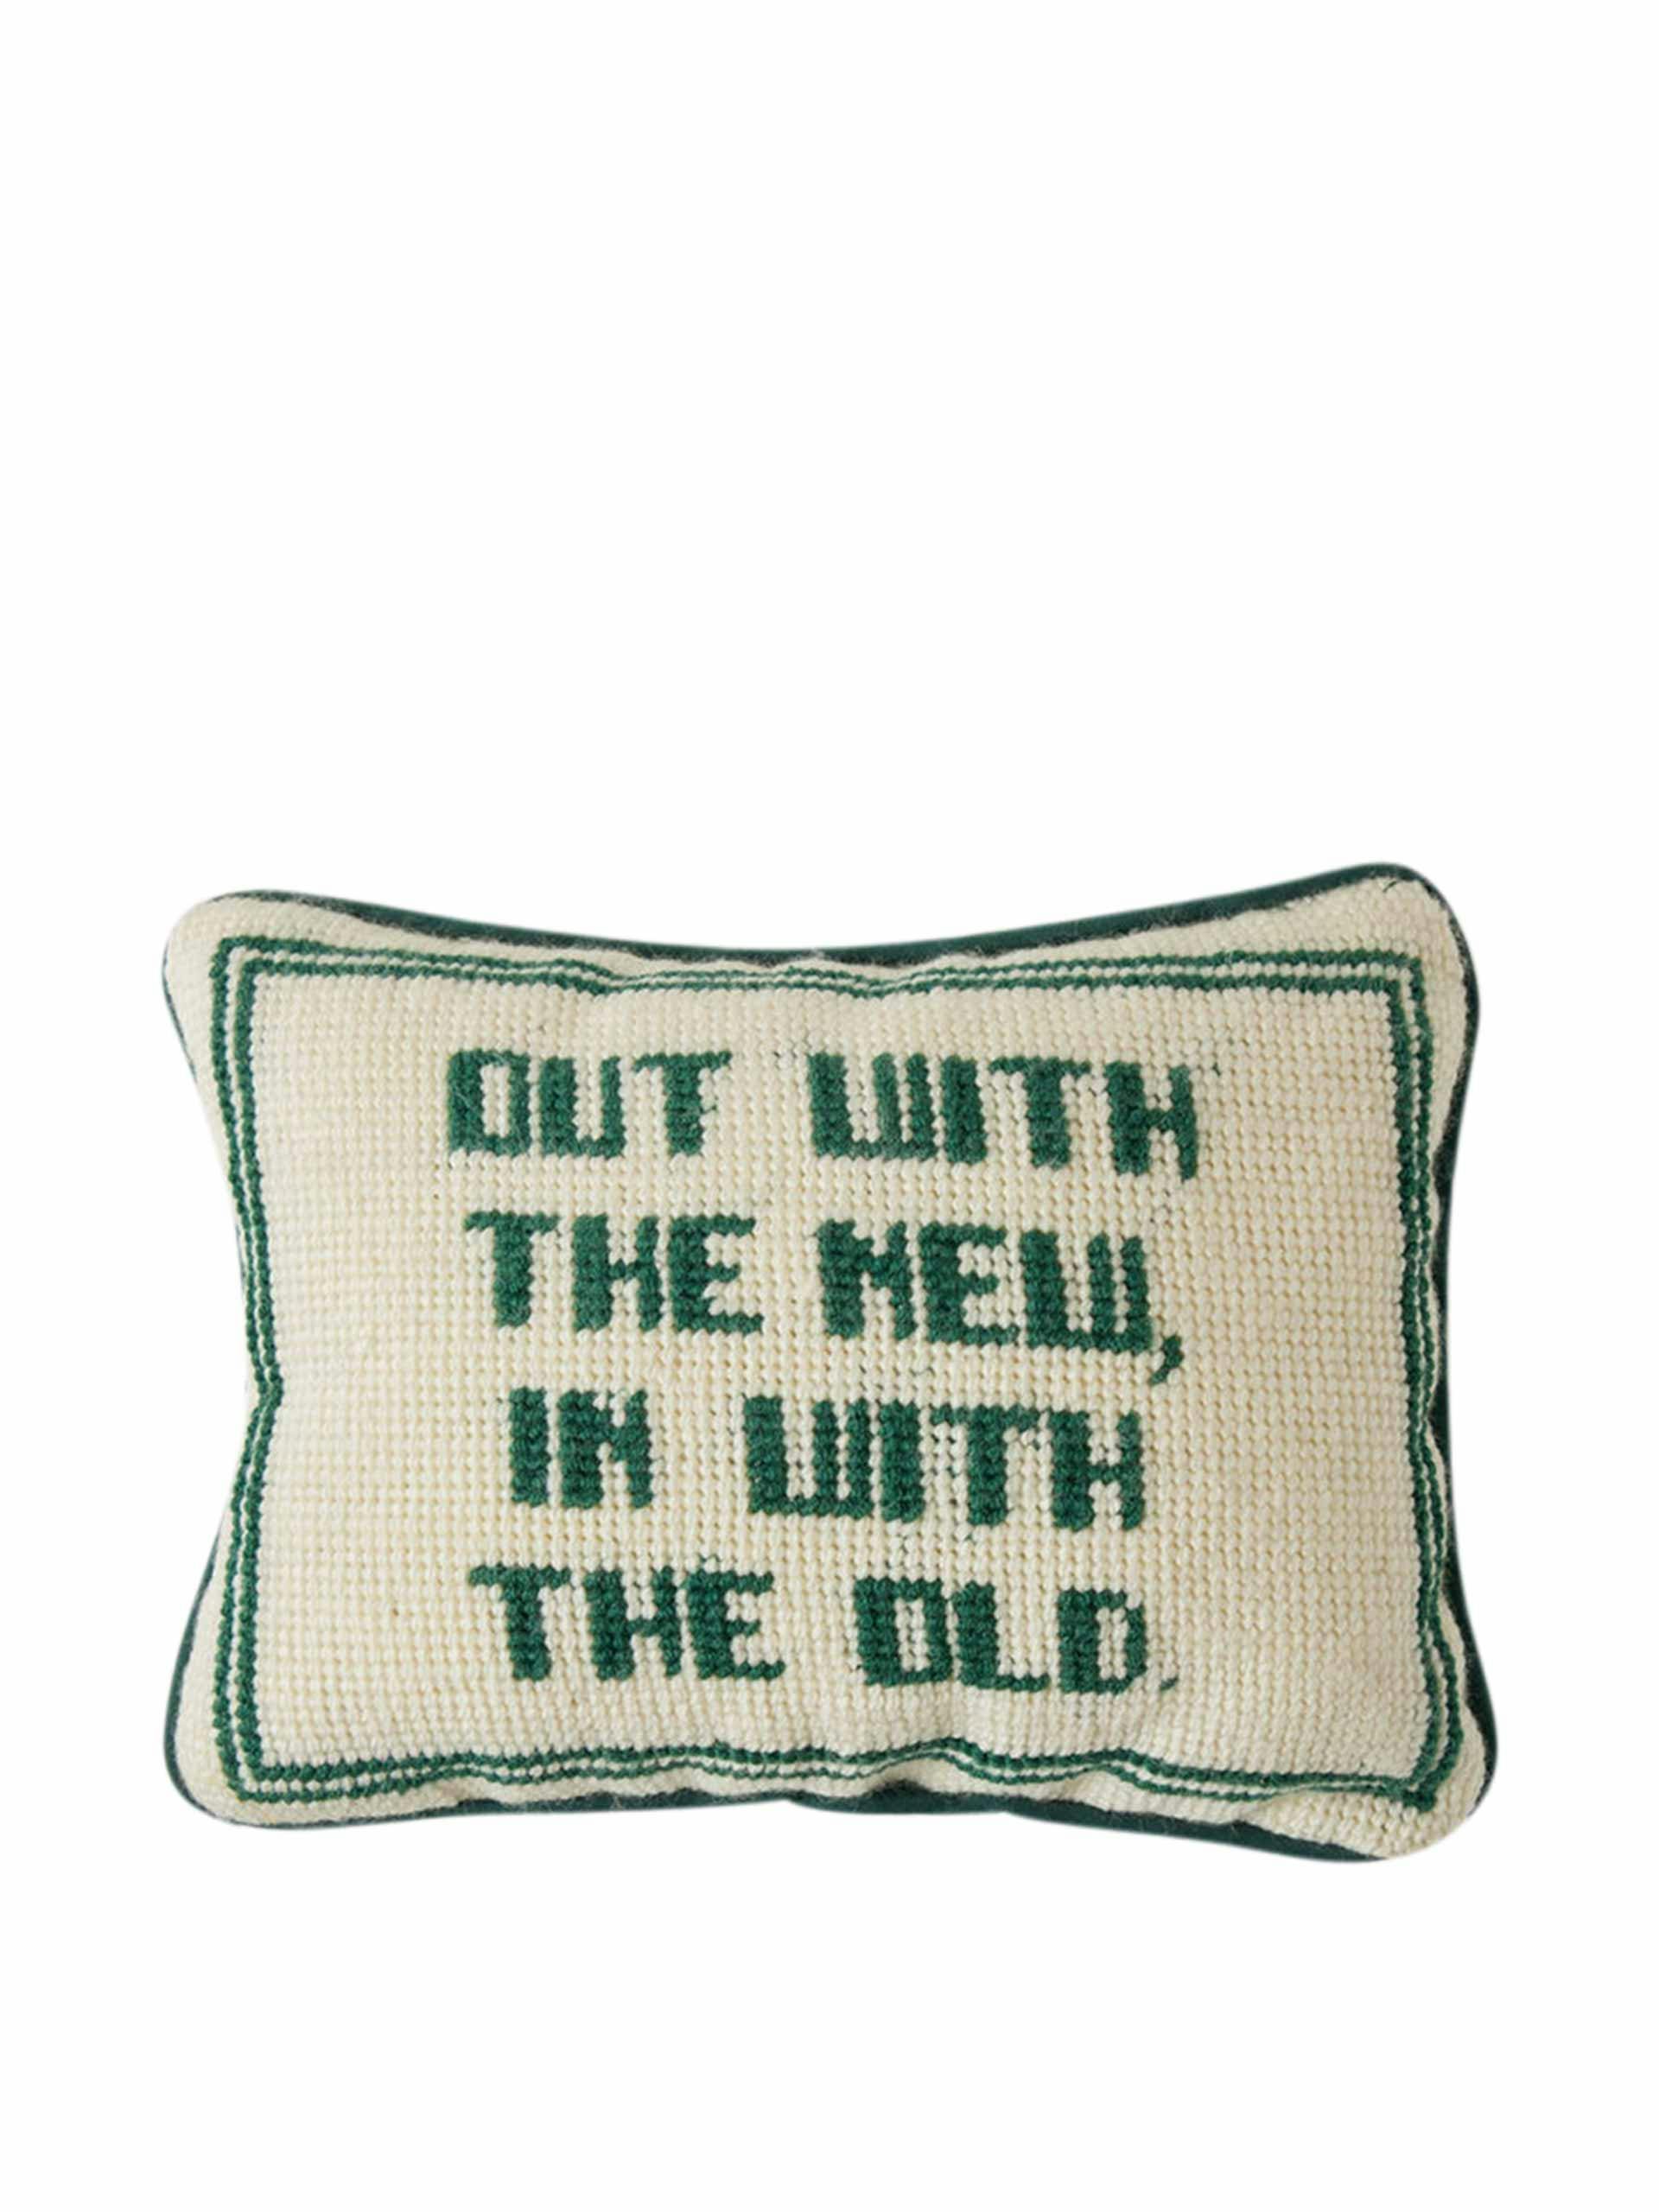 "Out with the New" cross stitch pillow